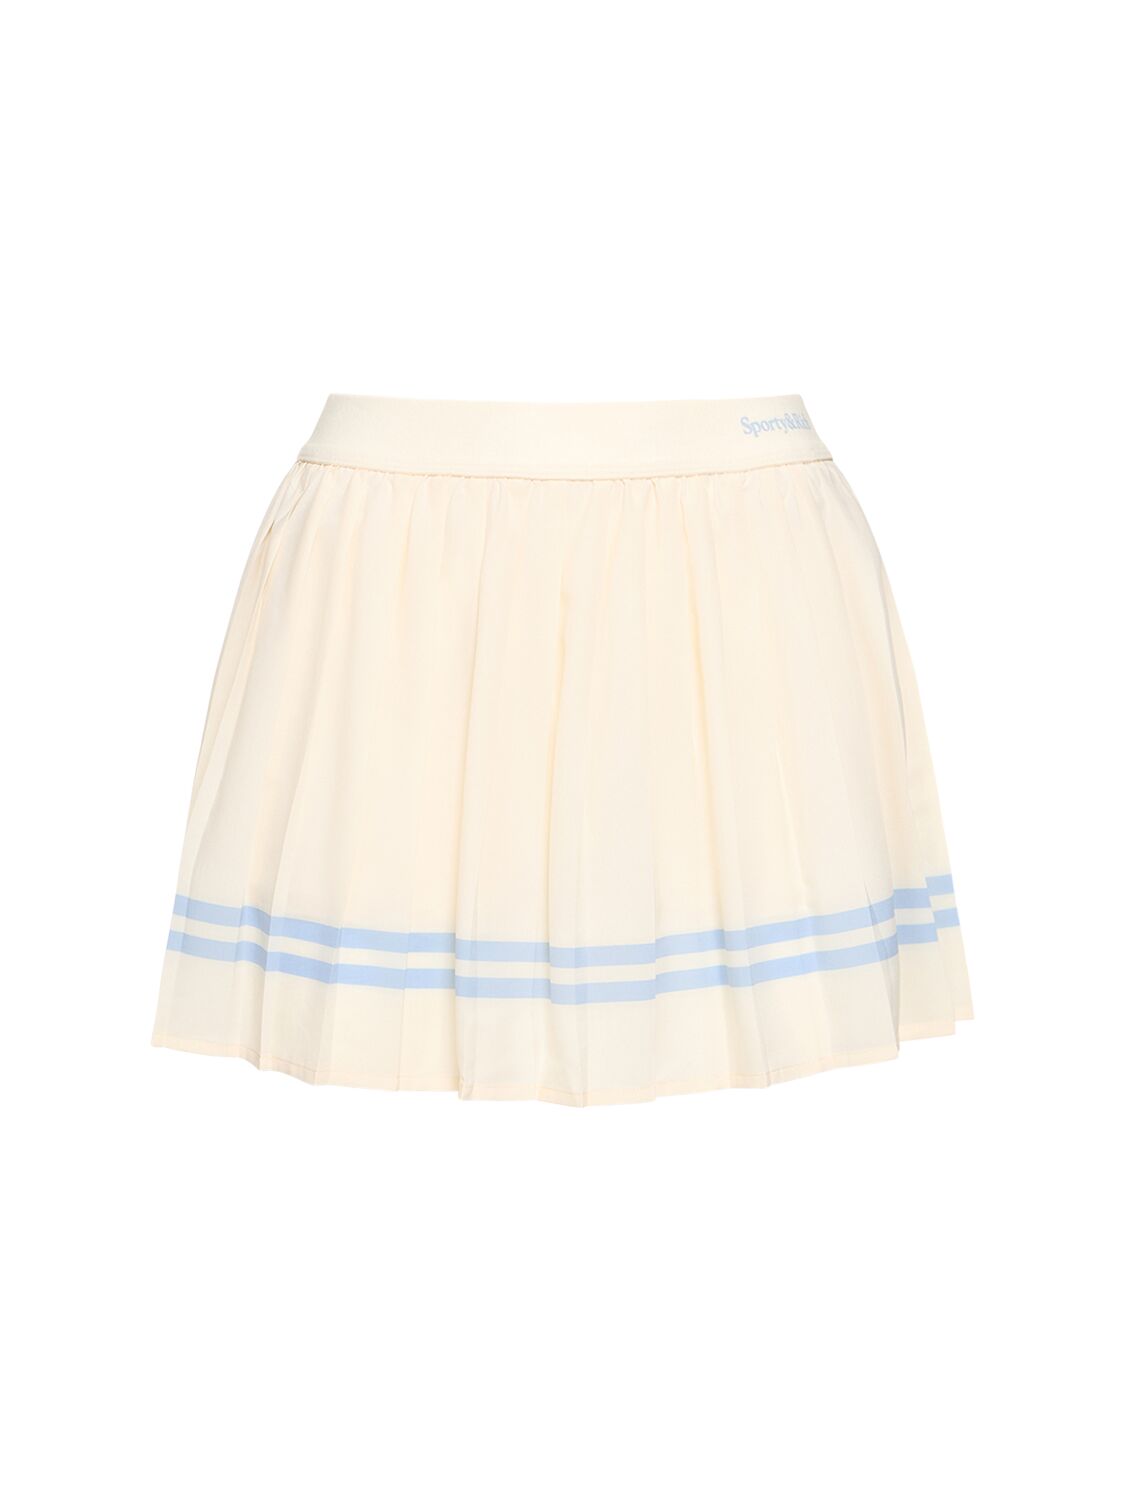 Sporty And Rich Serif Logo Pleated High Waist Skirt In Milk And Washed Hydrangea